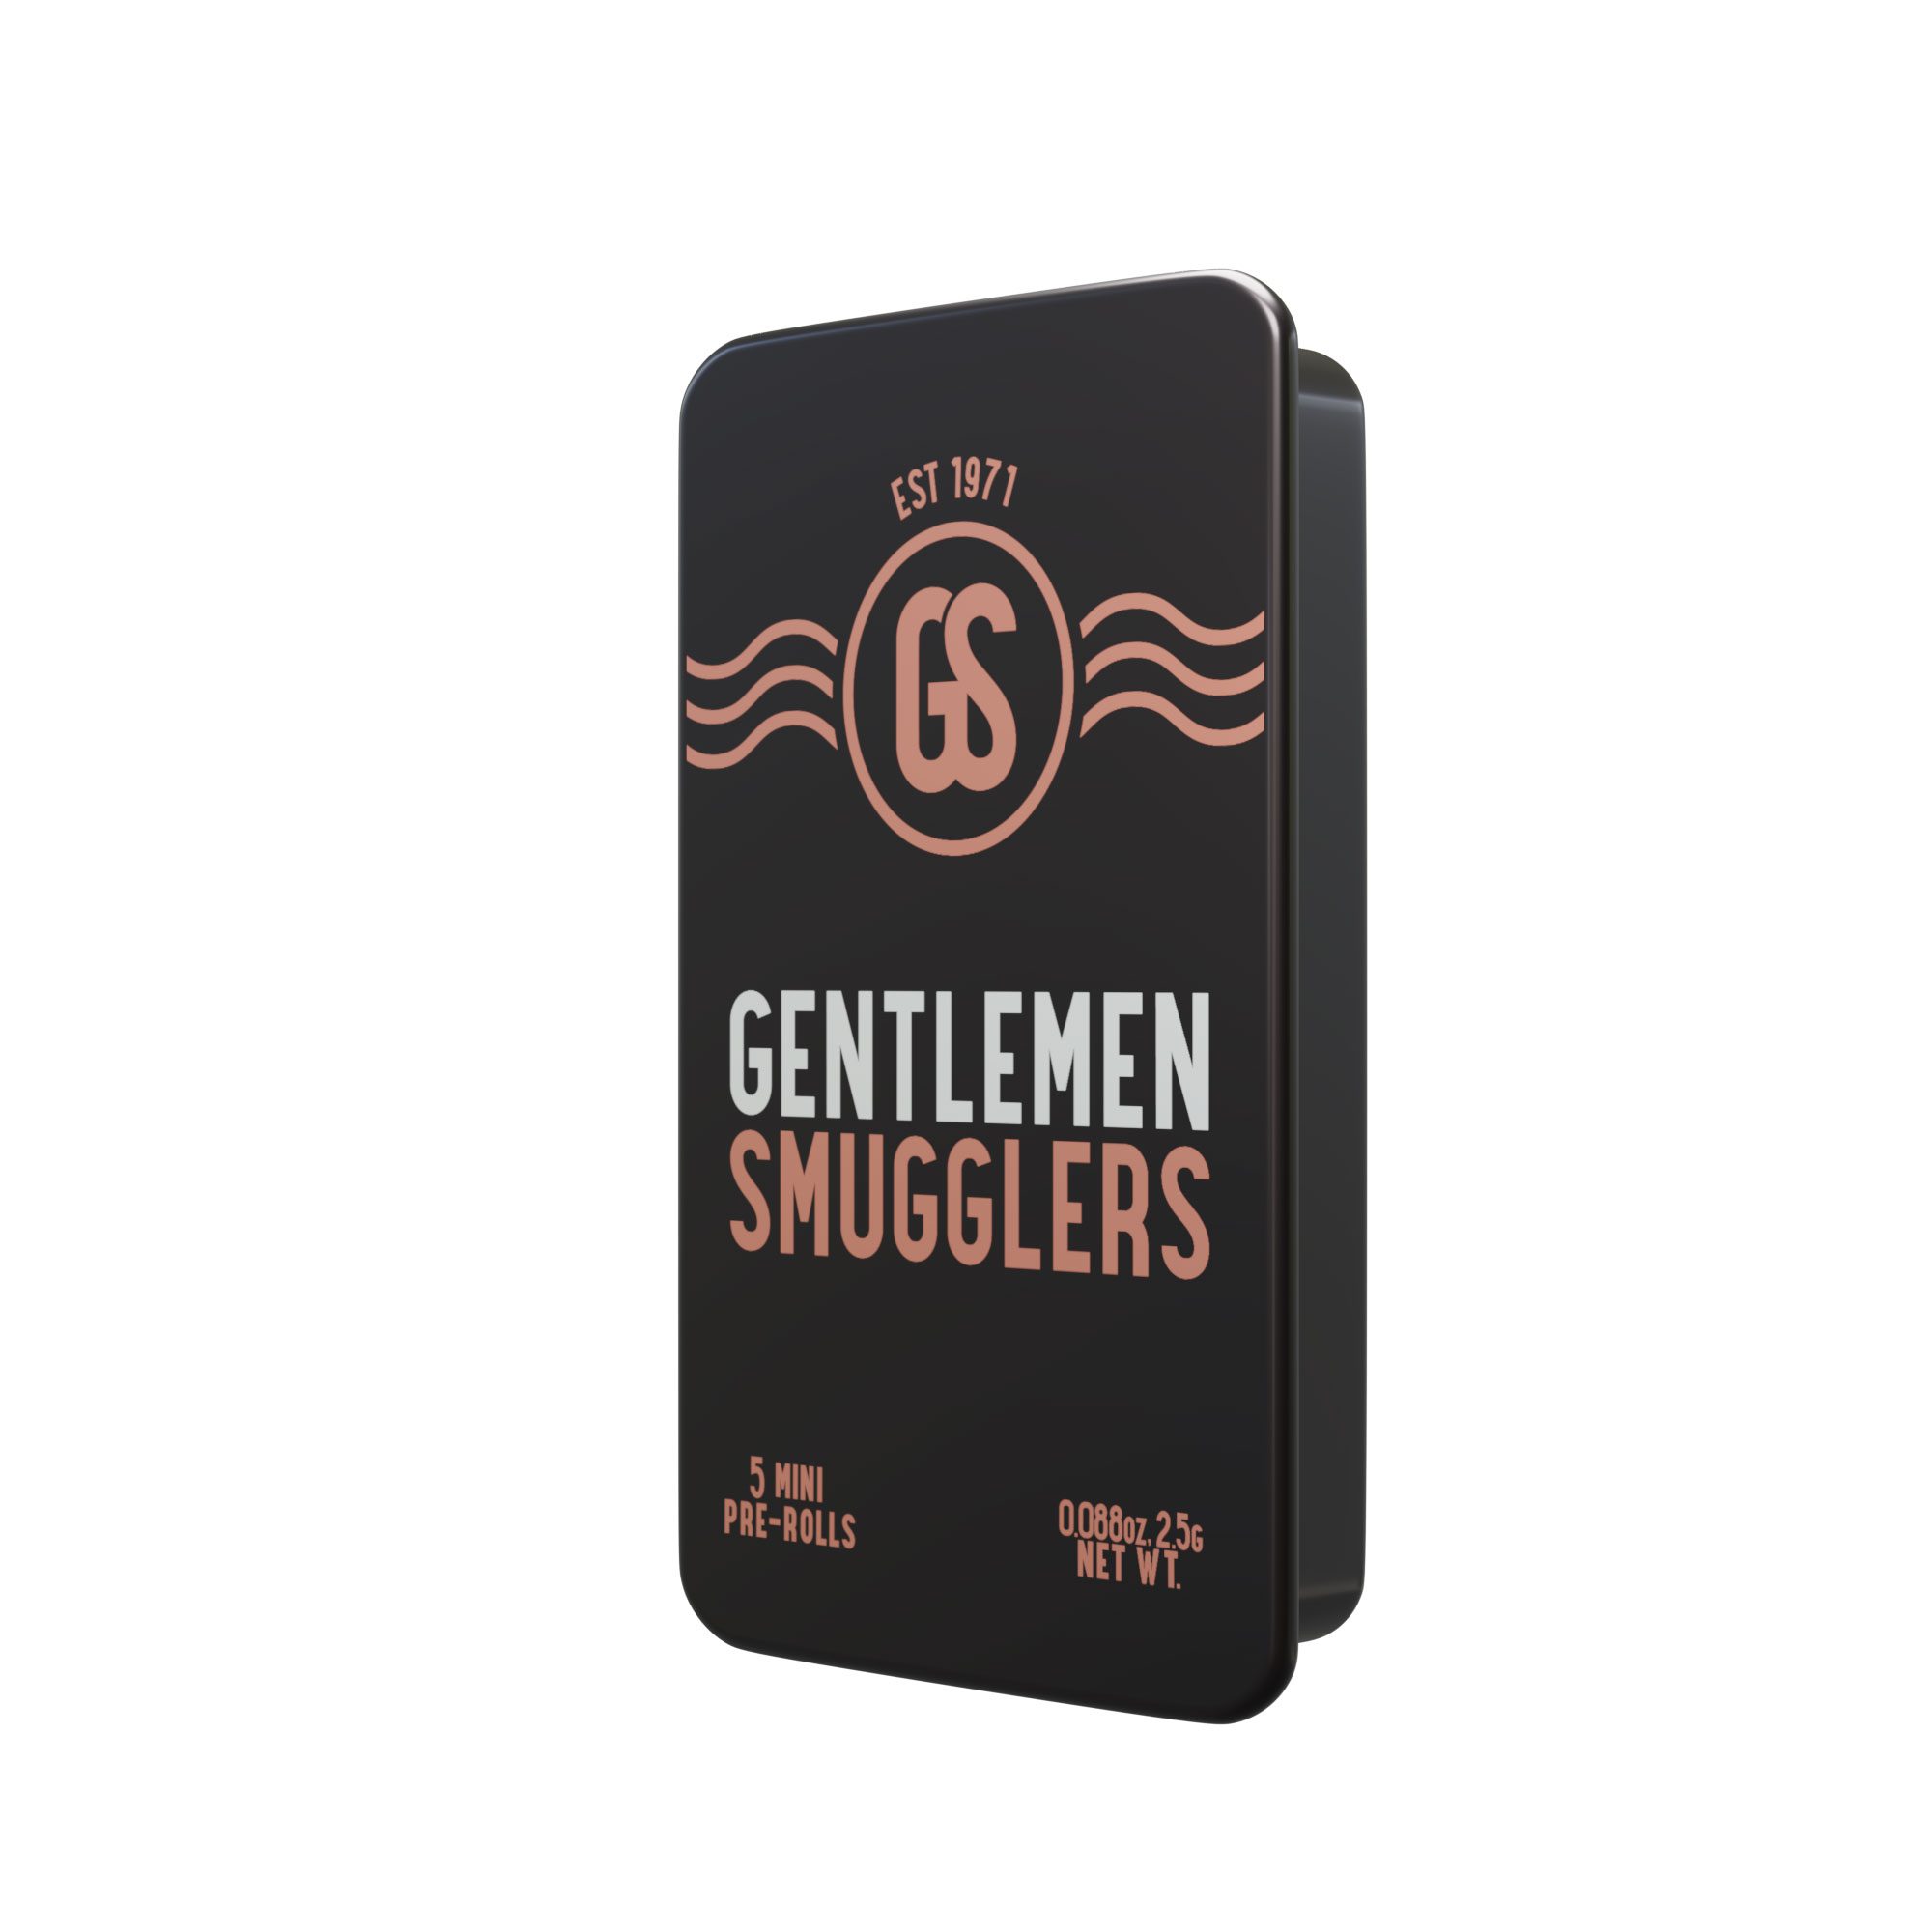 gentlemen-smugglers-products-5-Pre-Roll-Angled-Left